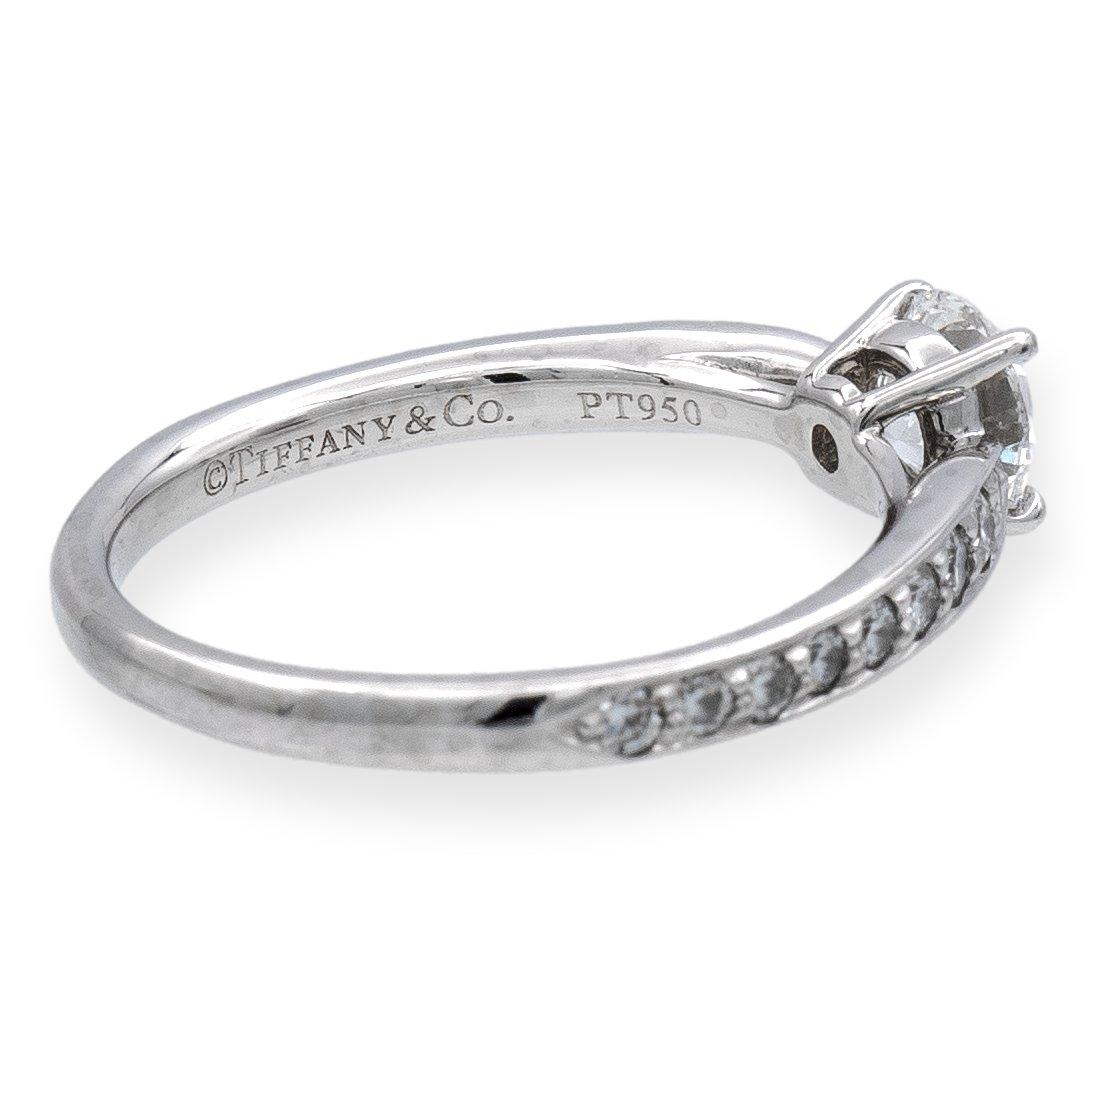 Tiffany & Co. round diamond engagement ring from the Harmony collection finely crafted in platinum featuring a round brilliant cut diamond center  weighing 0.42 carats E color VVS2 clarity. This ring has a tapered shank design. Ring is fully